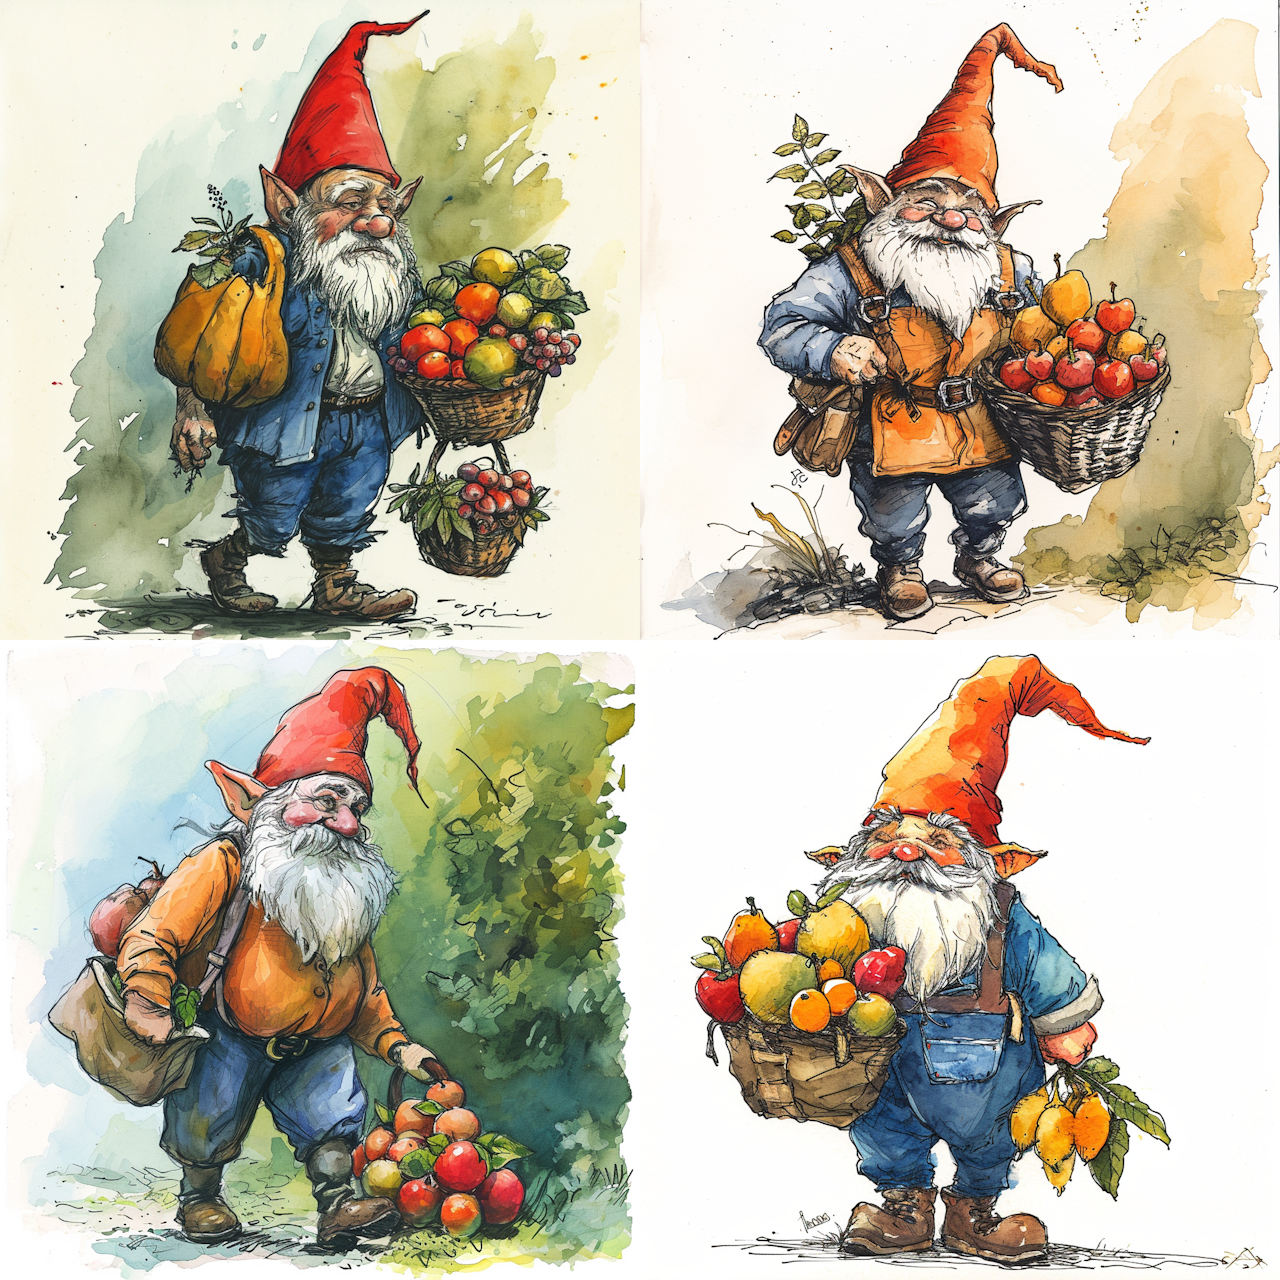 gnome carrying fruit comic style illustration